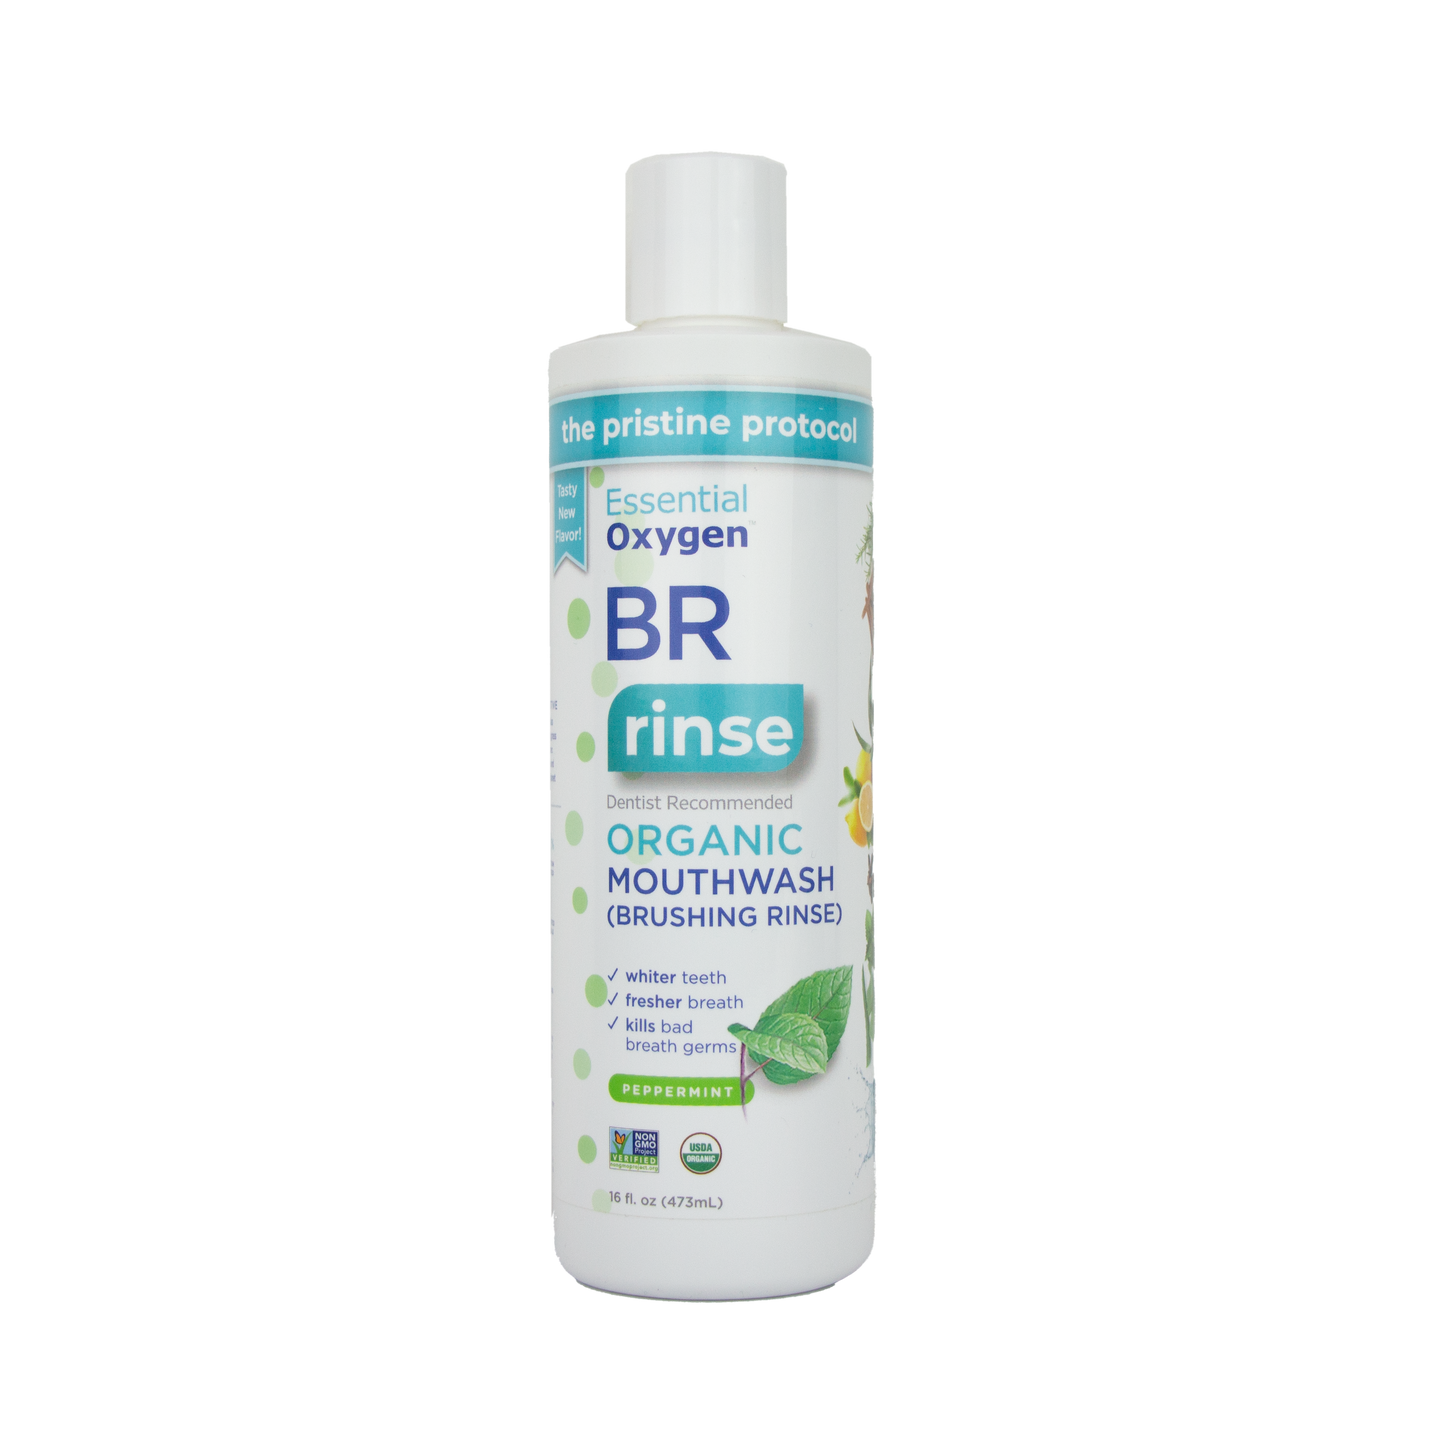 Essential Oxygen - Organic Mouthwash Brushing Rinse BR (Store Pick-Up Only)